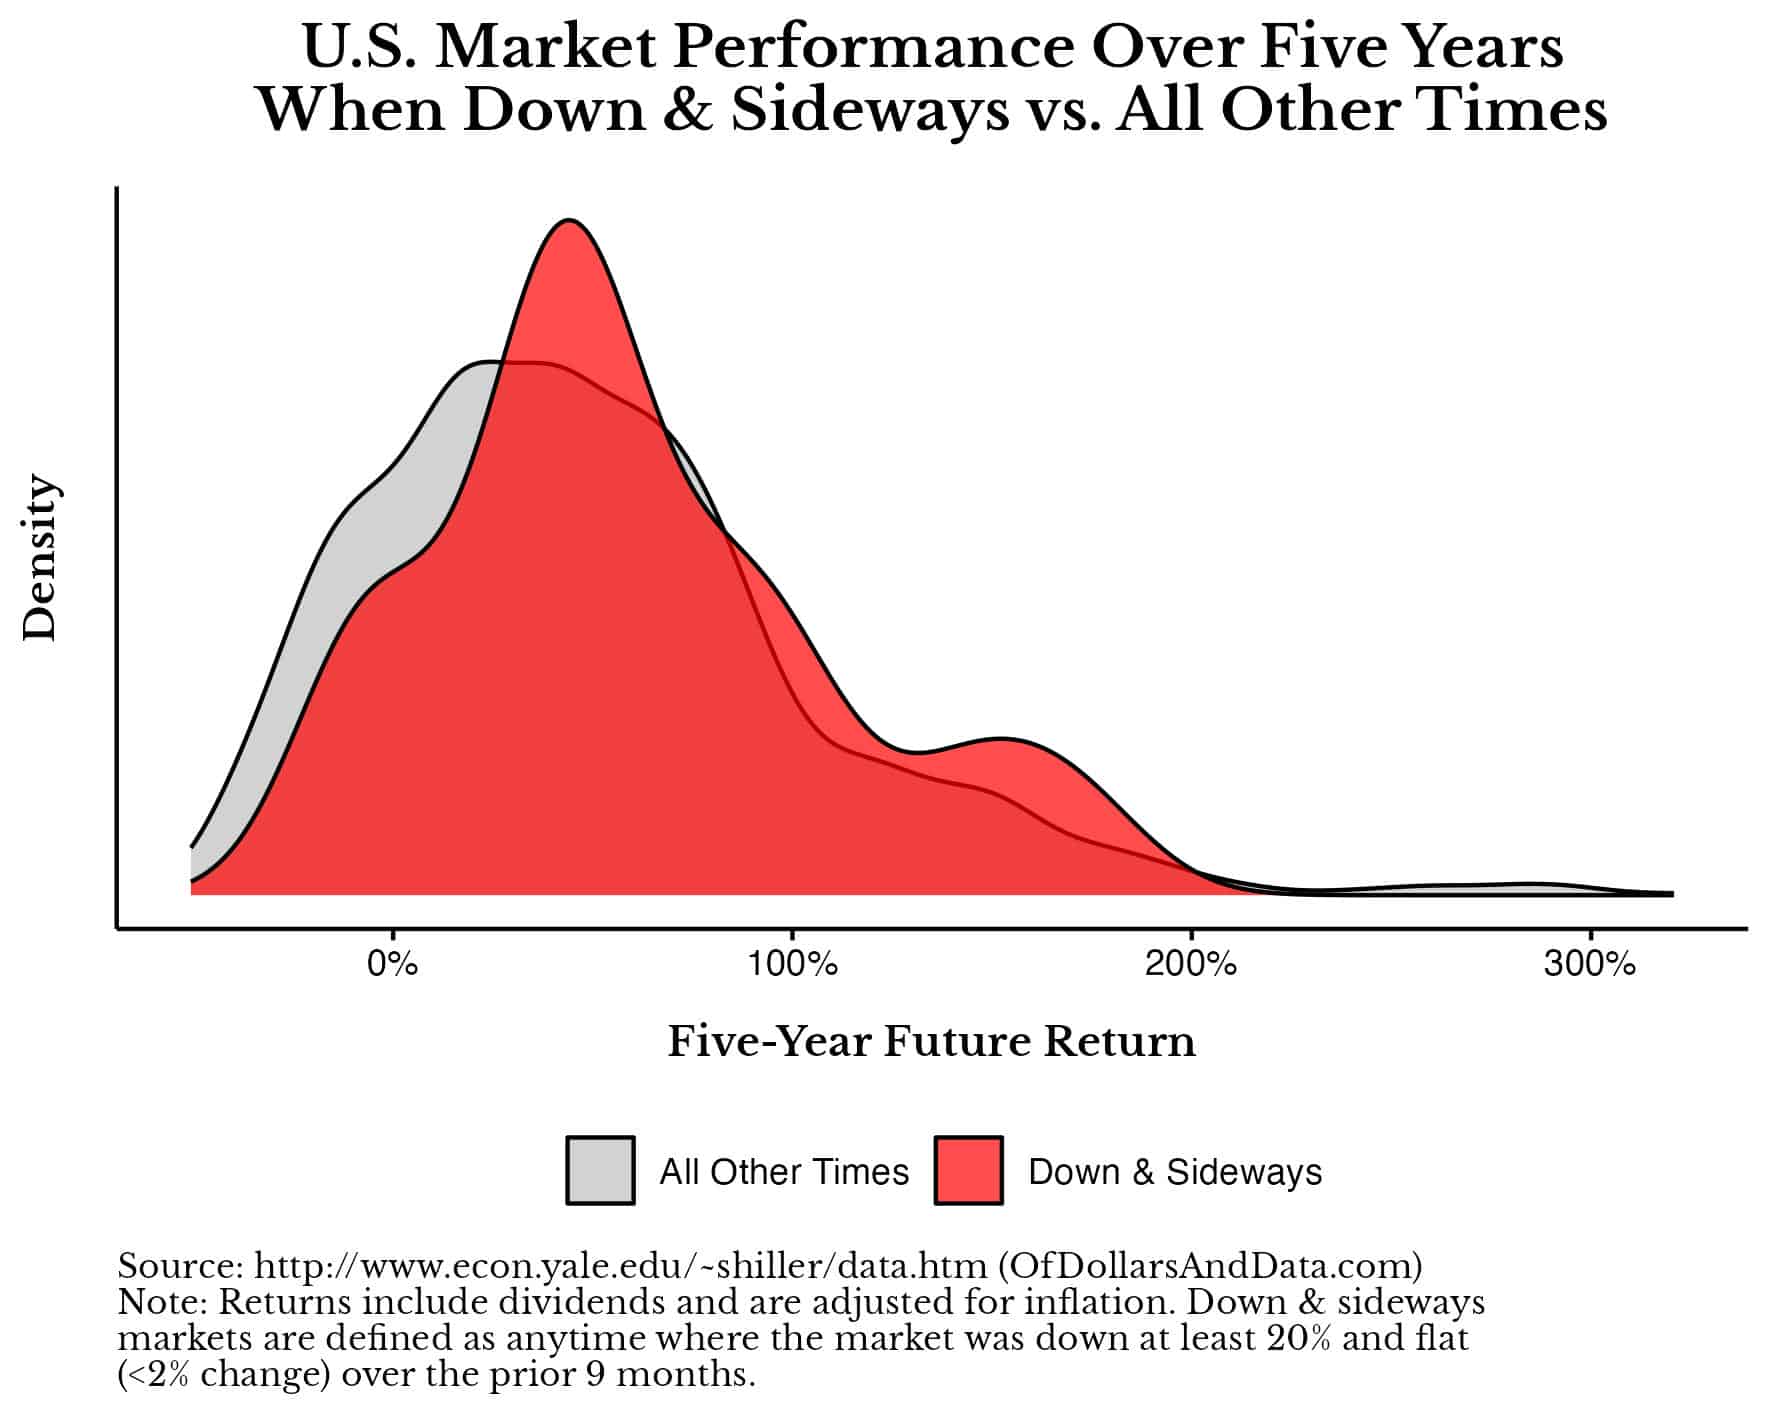 Distribution plot showing future 5-year returns of U.S. stocks during down & sideways markets vs. all other times.